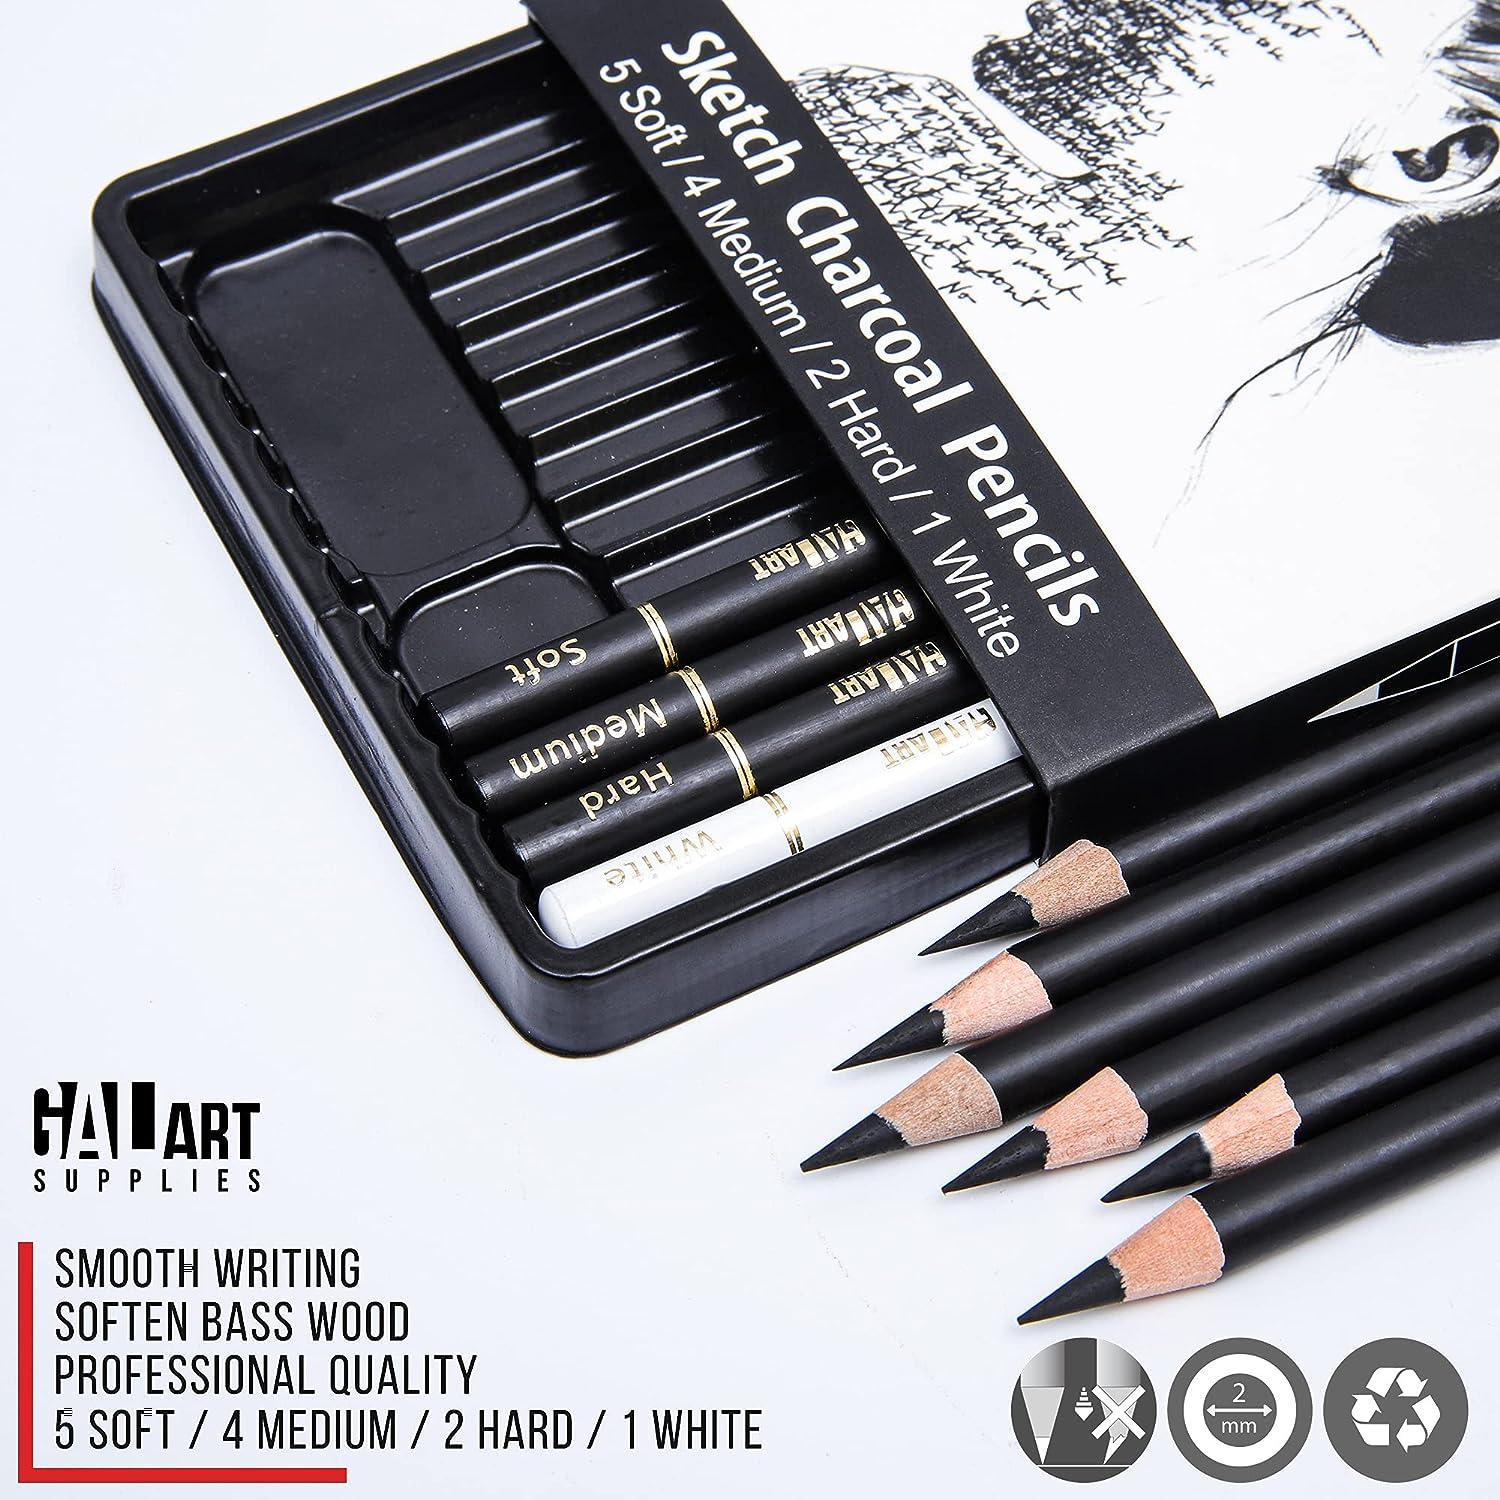 Galart Supplies Charcoal Drawing Set 12 Pieces Pre-Sharped Soft Medium Hard  and White Charcoal Pencils for Drawing with Organizer Tray Shading and  Sketching for Artists and Beginners